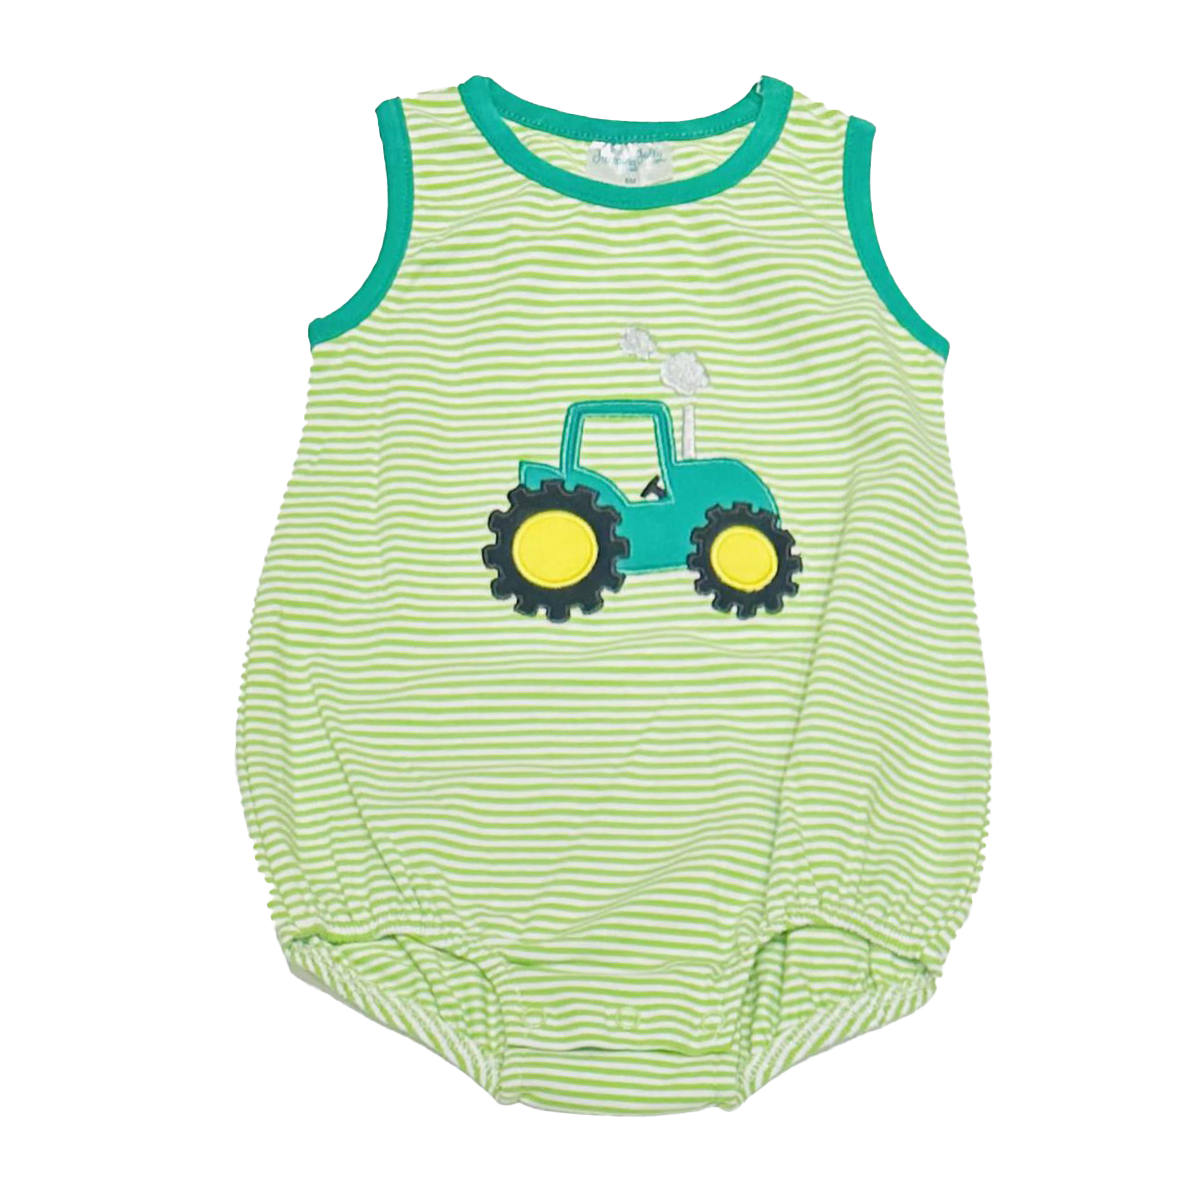 Boy's Appliqued Green Tractor Knit Sleeveless Bubble